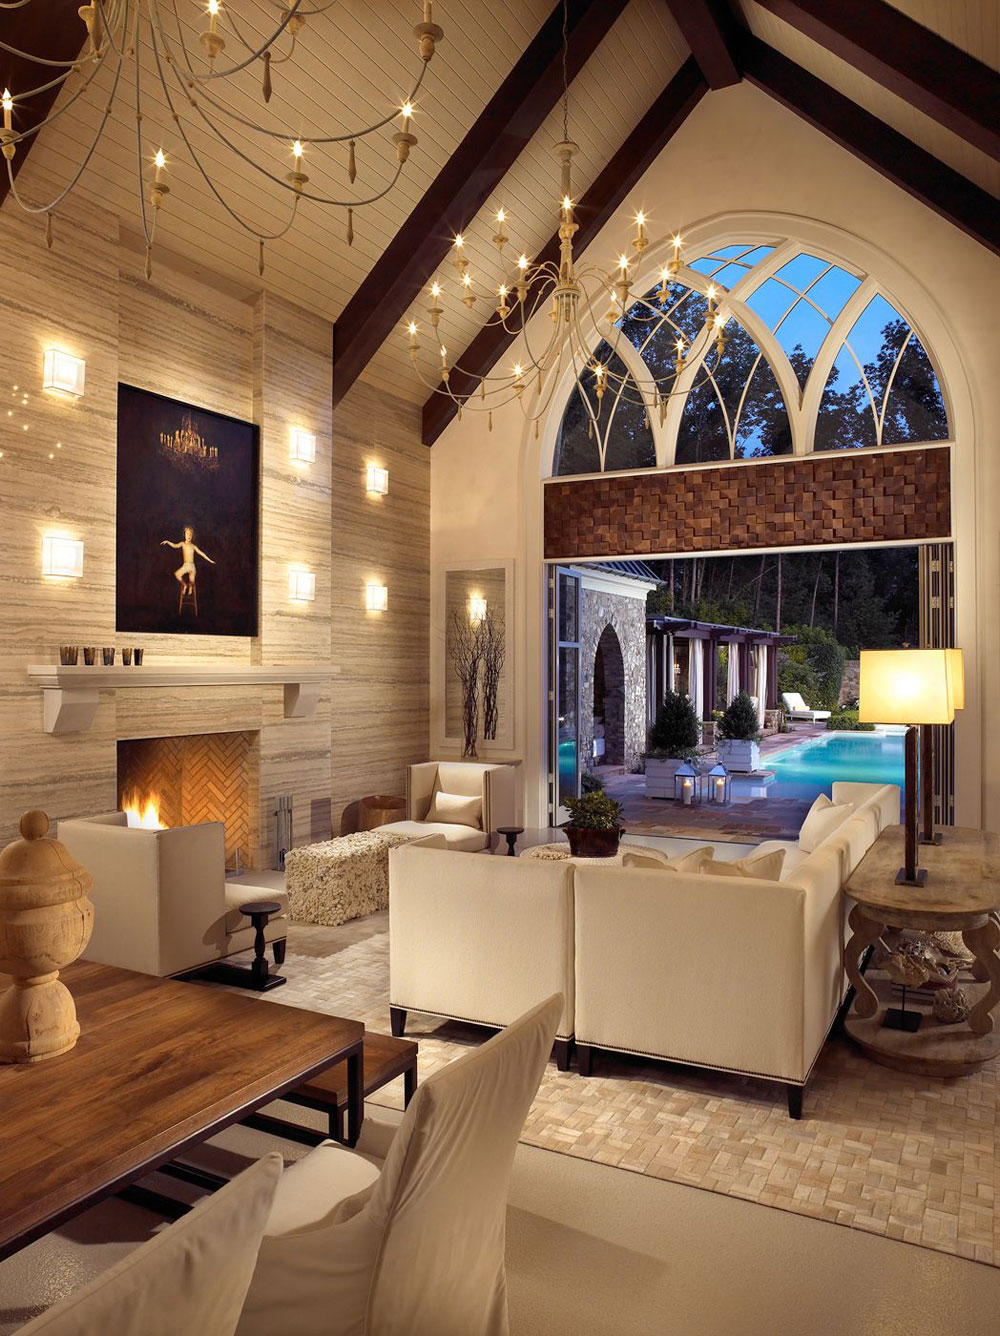 Large living room with vaulted ceiling